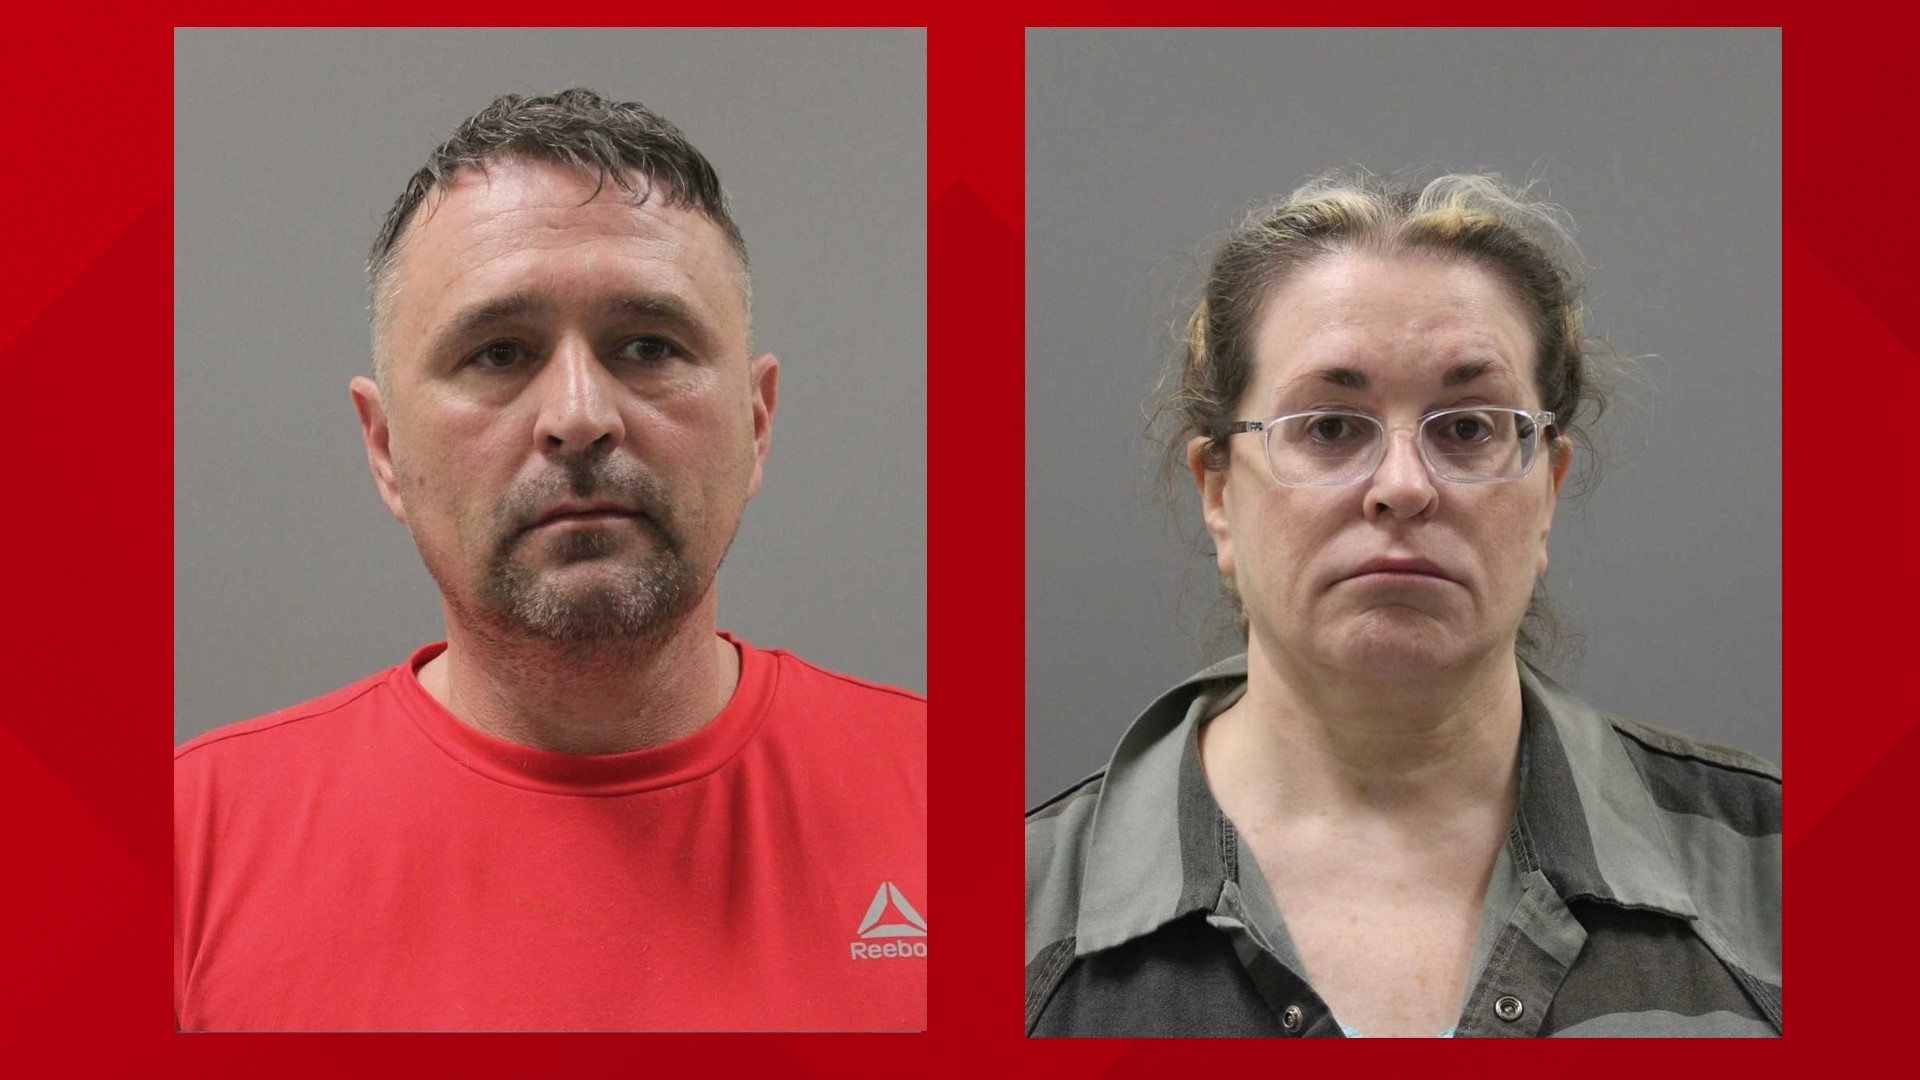 Chadwick Crabtree and wife Melissa were arrested Friday. Chadwick works as warden at the Limestone County Correctional Facility.